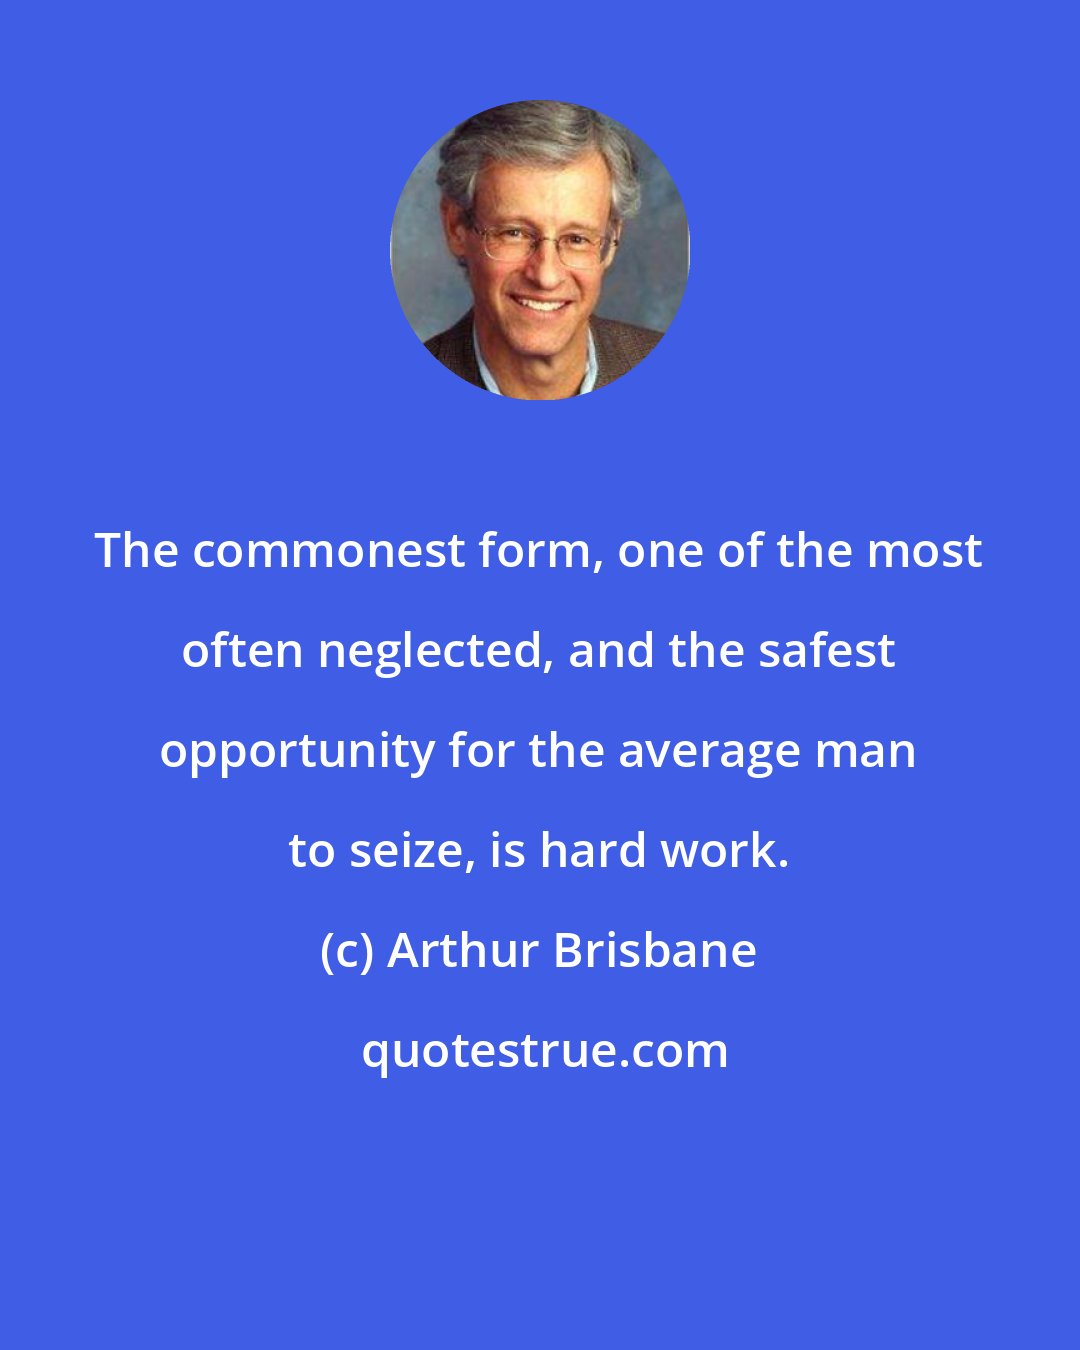 Arthur Brisbane: The commonest form, one of the most often neglected, and the safest opportunity for the average man to seize, is hard work.